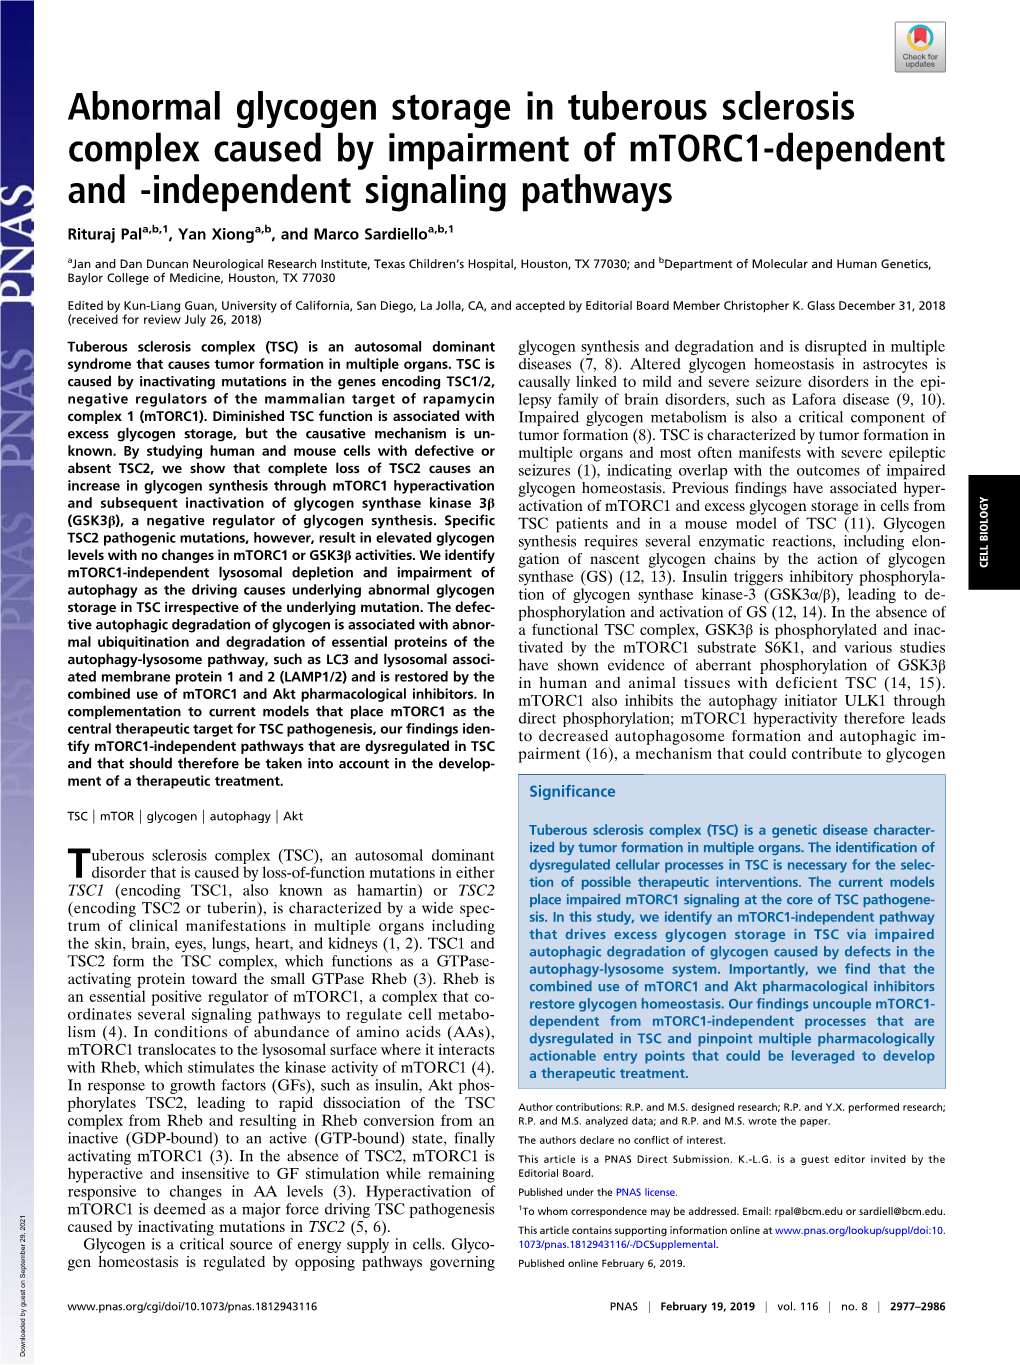 Abnormal Glycogen Storage in Tuberous Sclerosis Complex Caused by Impairment of Mtorc1-Dependent and -Independent Signaling Pathways